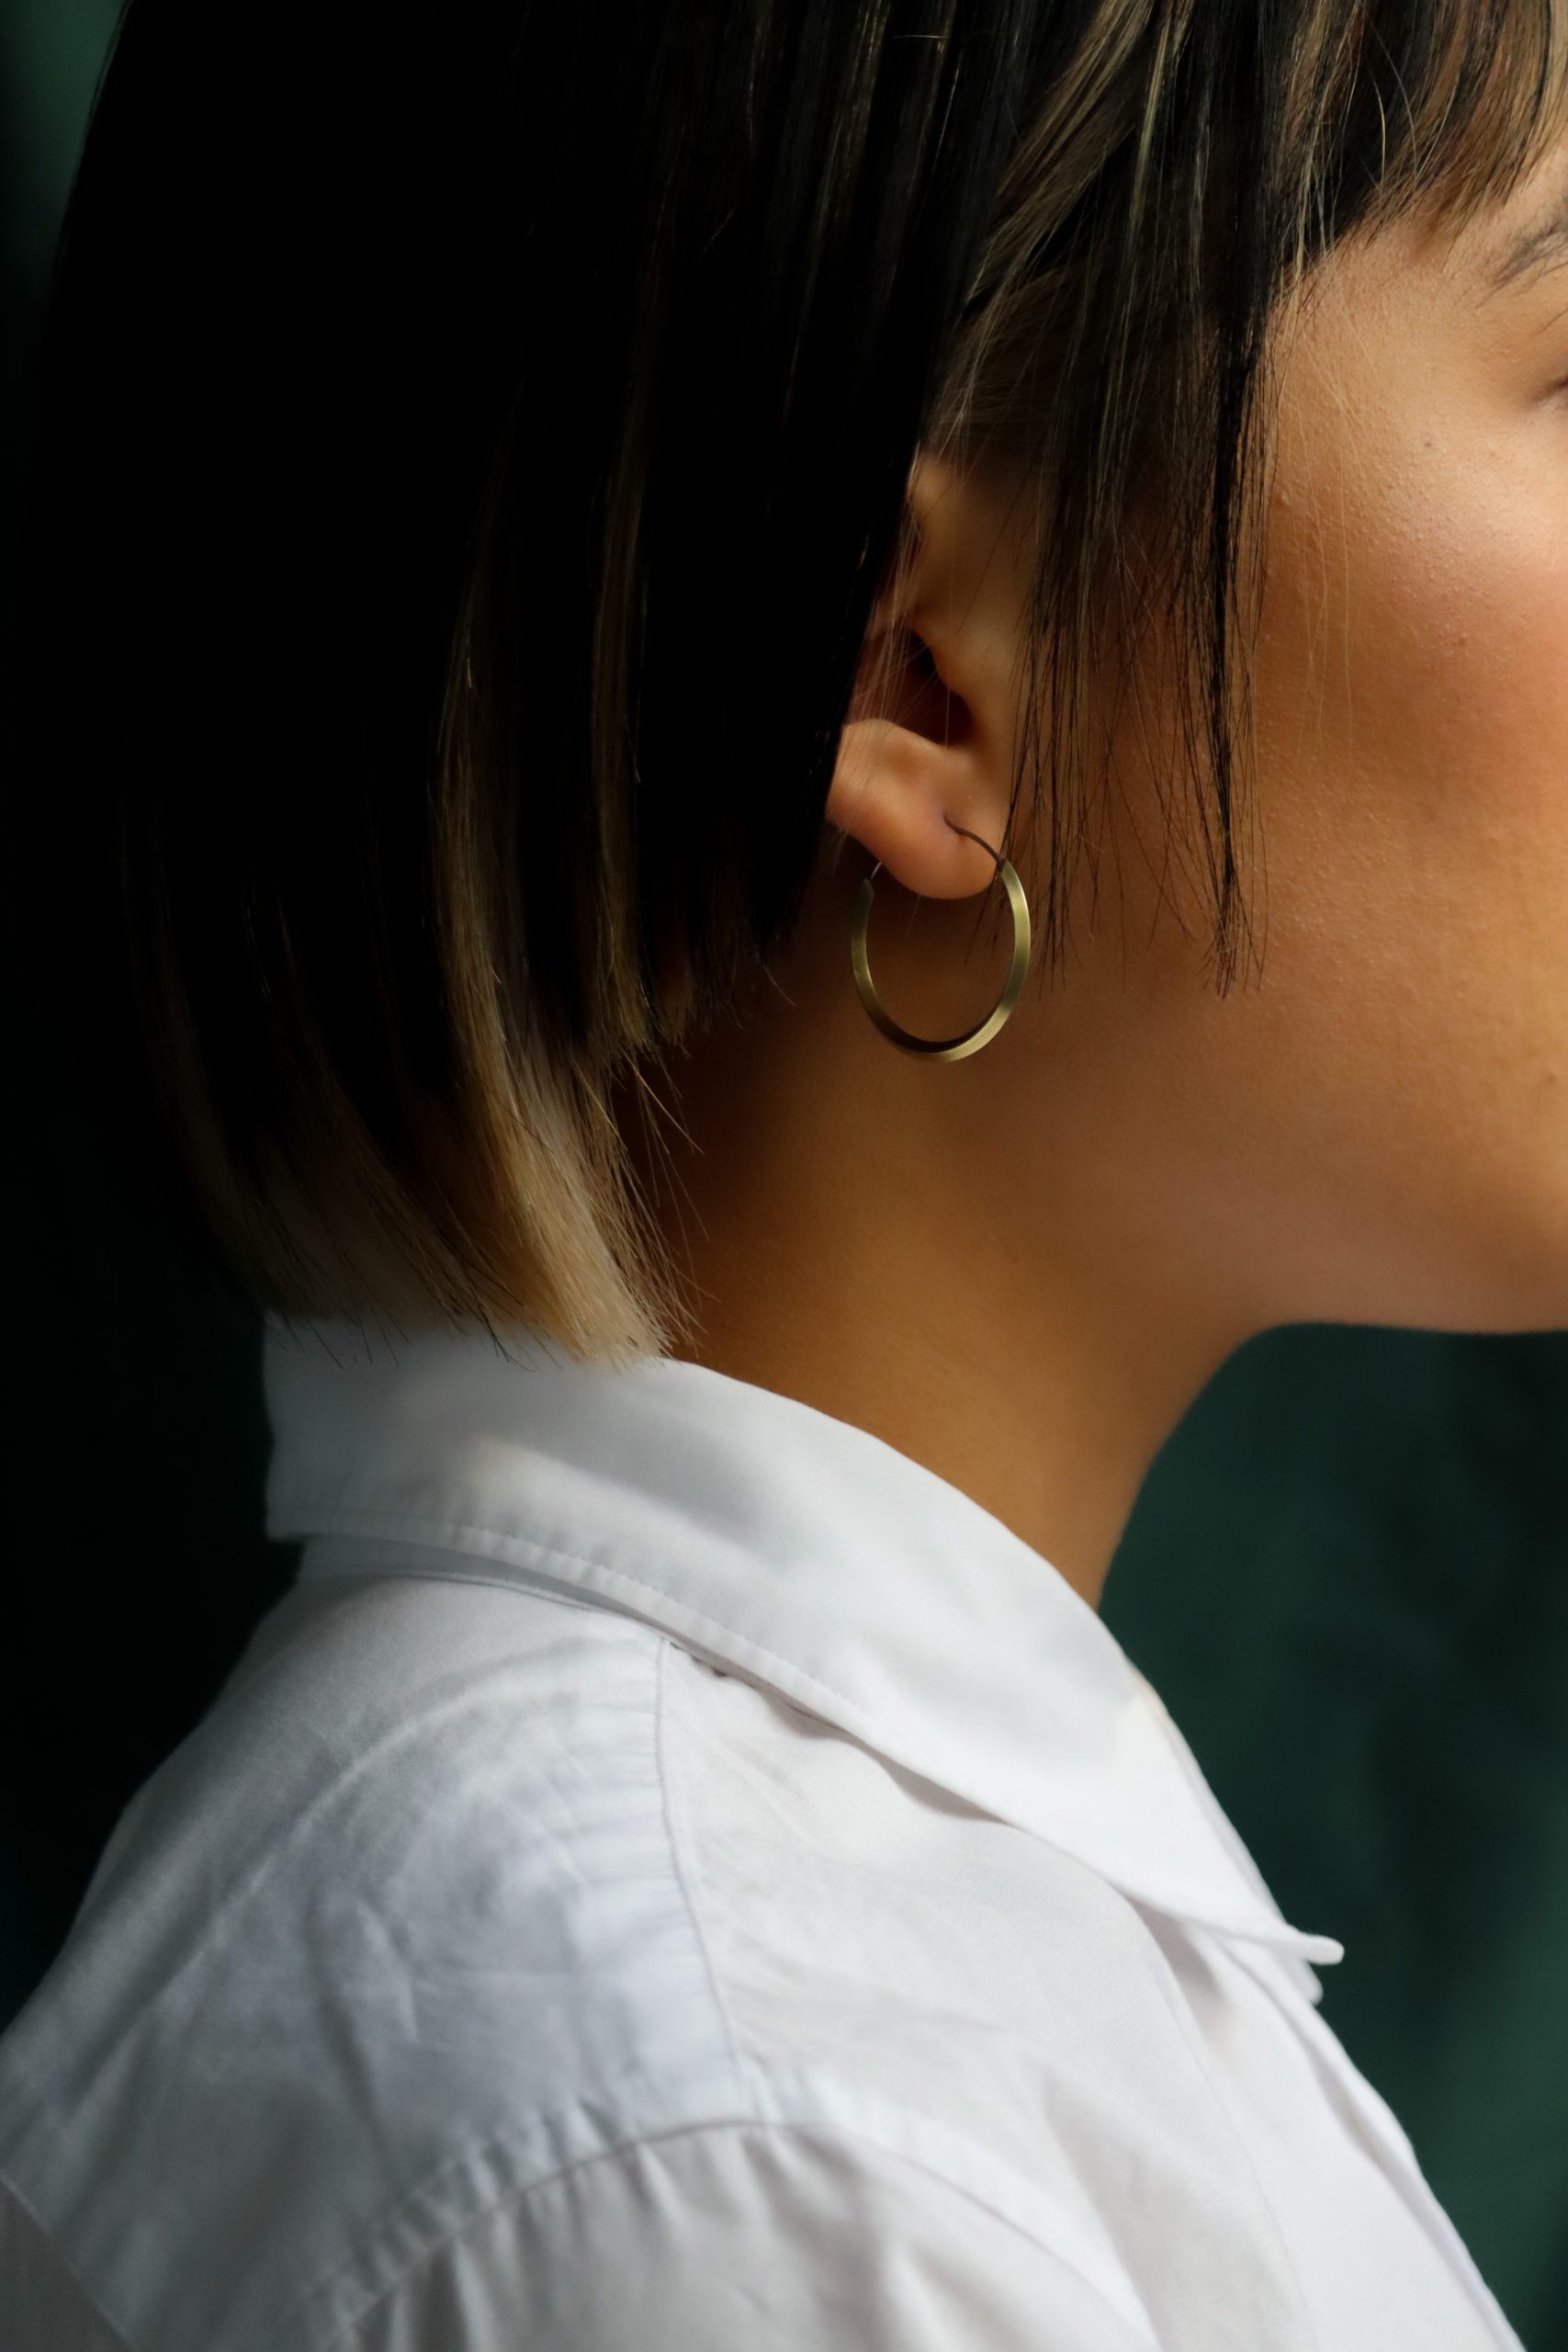 Side view of young woman with short hair, white collared shirt shoulders up wearing 30mm brass hoops